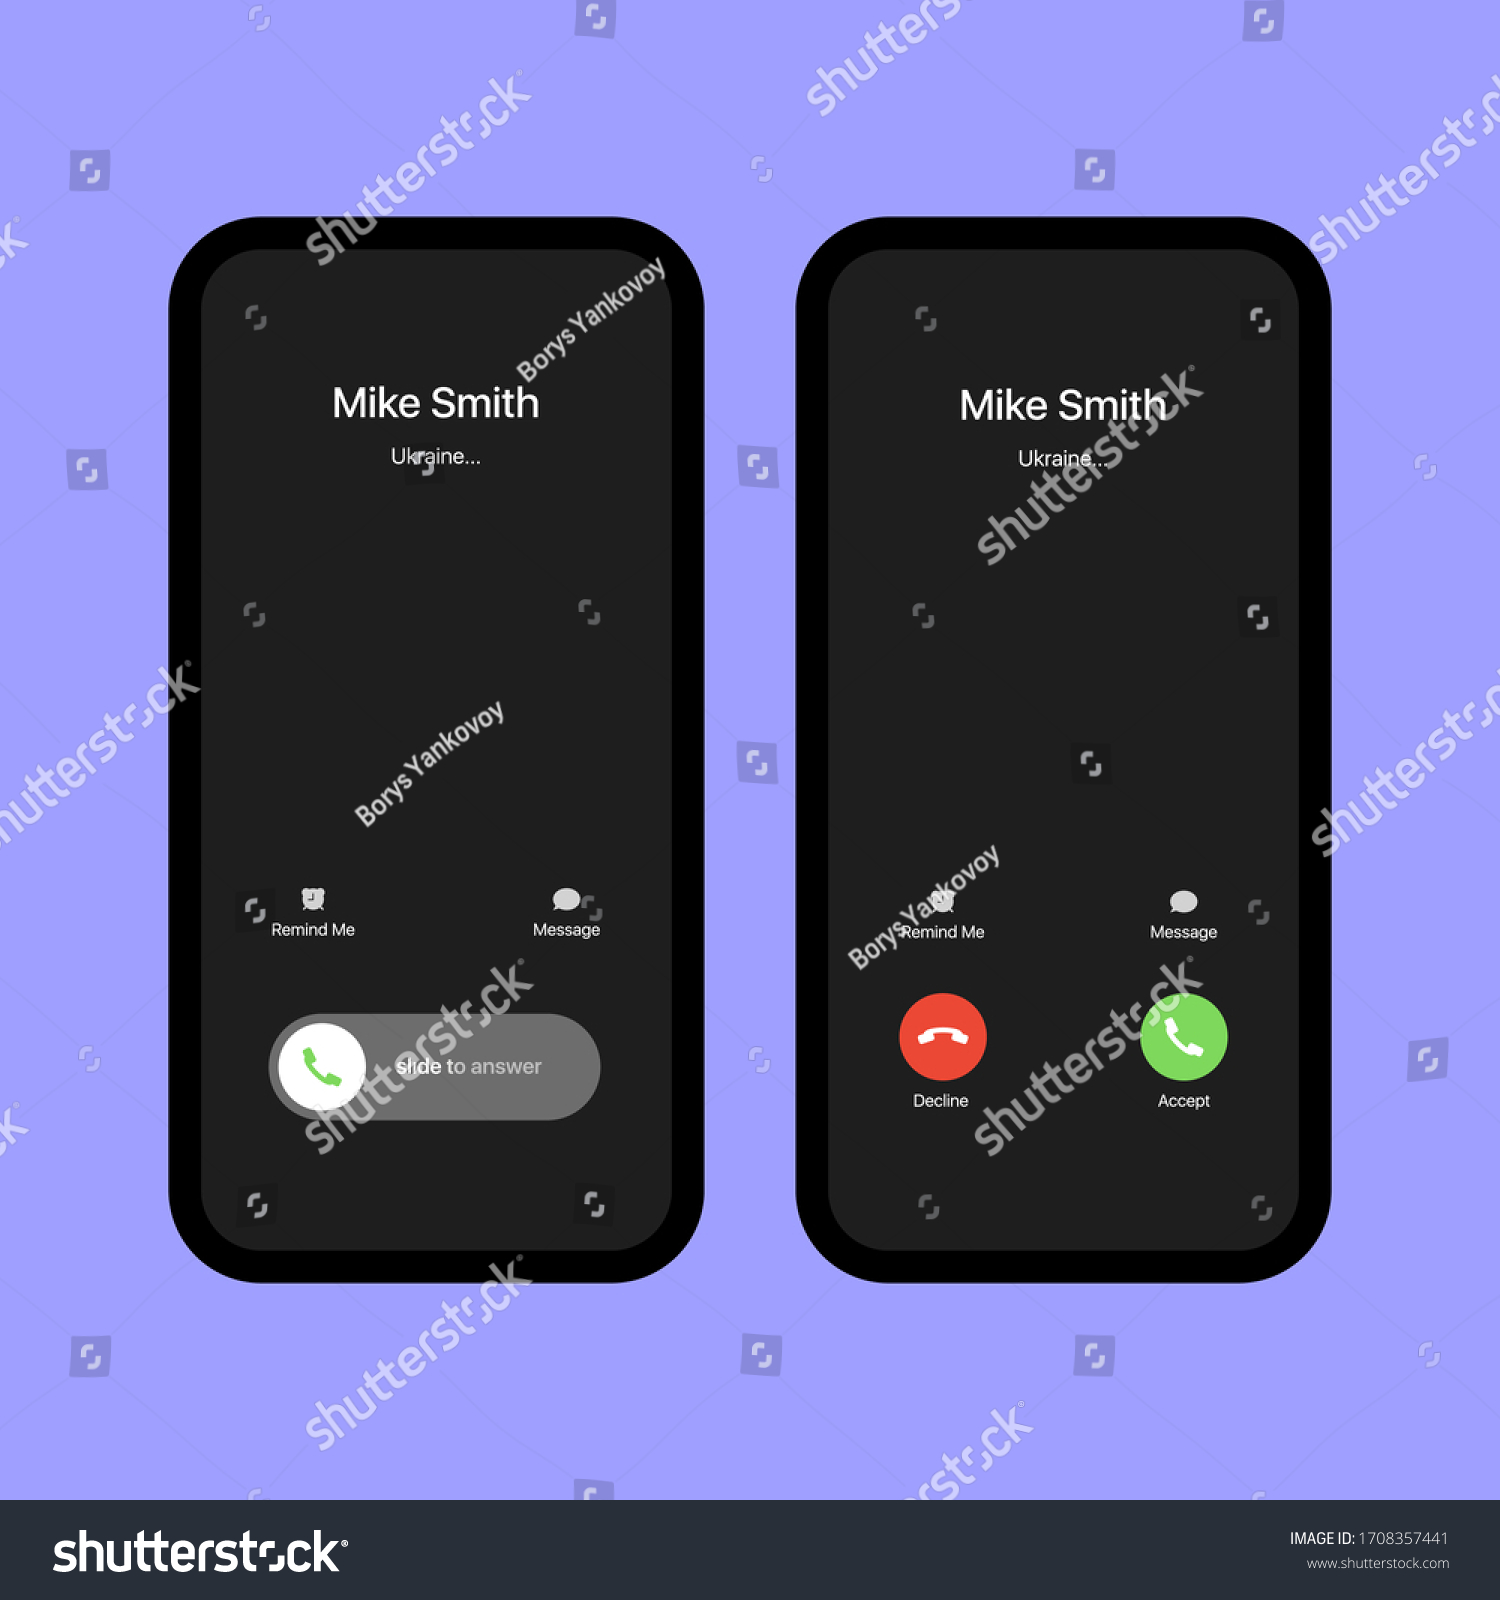 iPhone Call Screen Set. Interface. Slide To Answer. Accept Button, Decline Button. Incoming Call. iPhone iOS Call Screen Template. Smartphone, Phone Call Screen Vector Mockup On Violet Background #1708357441